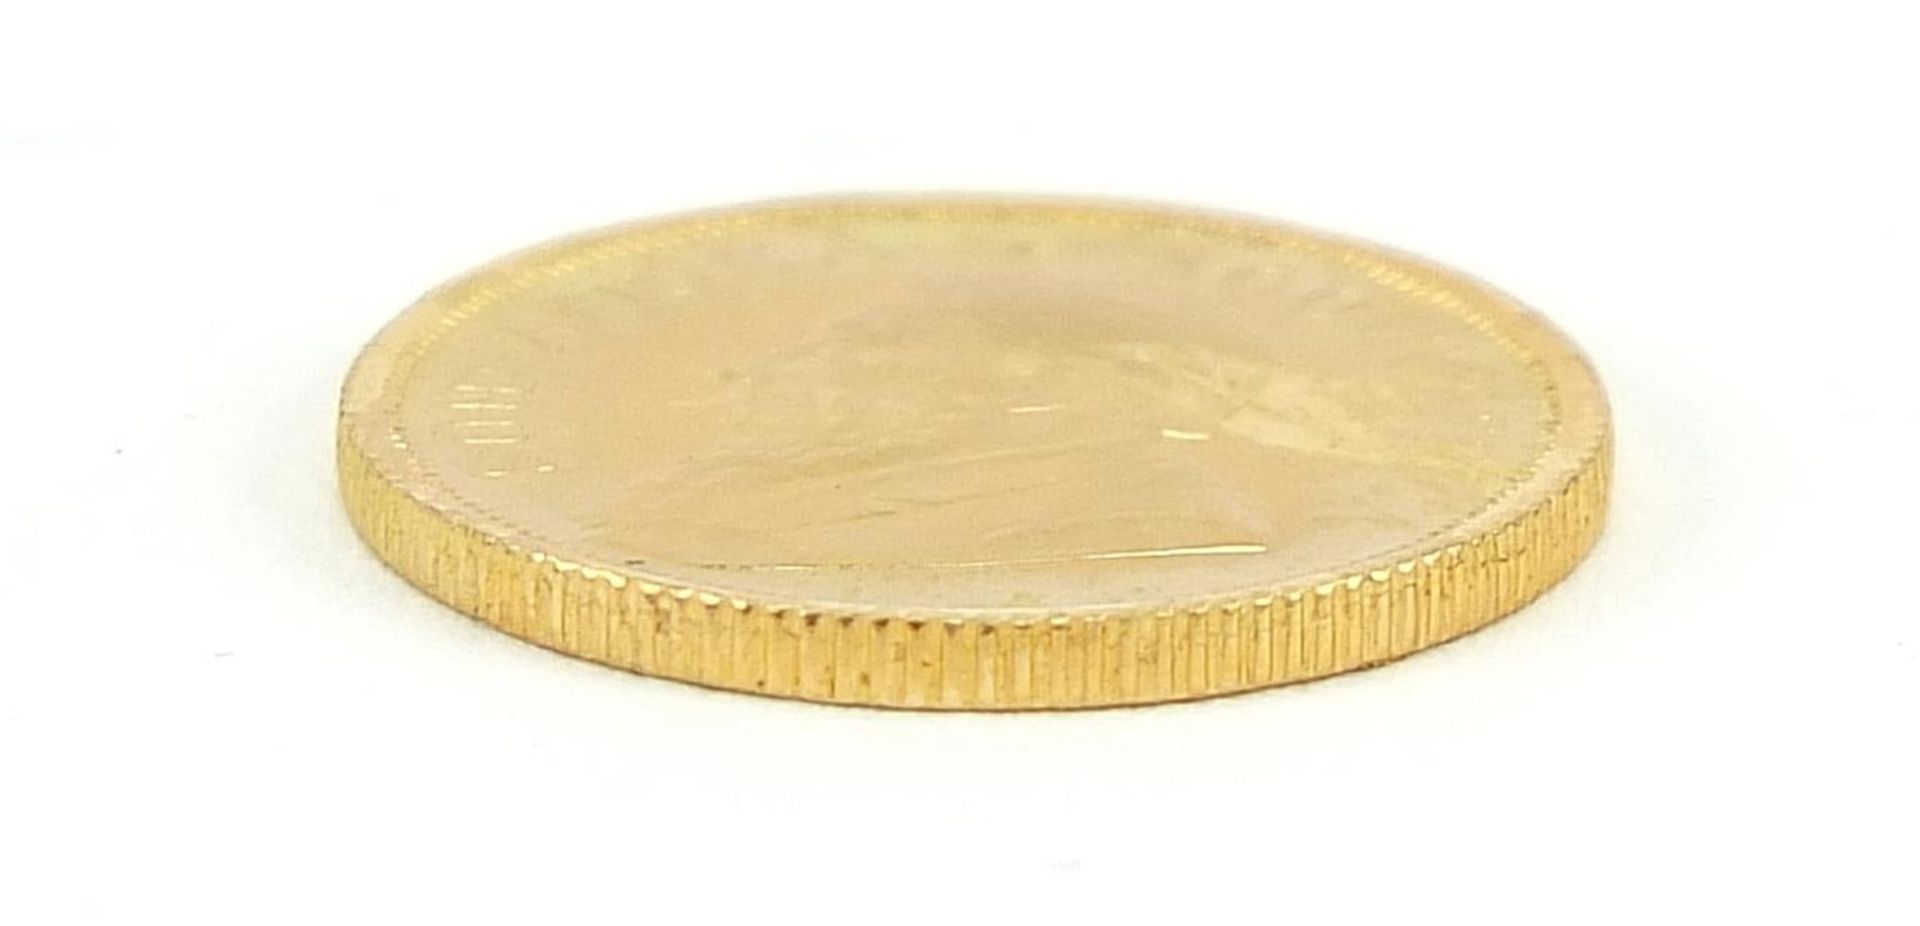 South African 1980 one tenth gold krugerrand - this lot is sold without buyer?s premium, the - Image 3 of 3